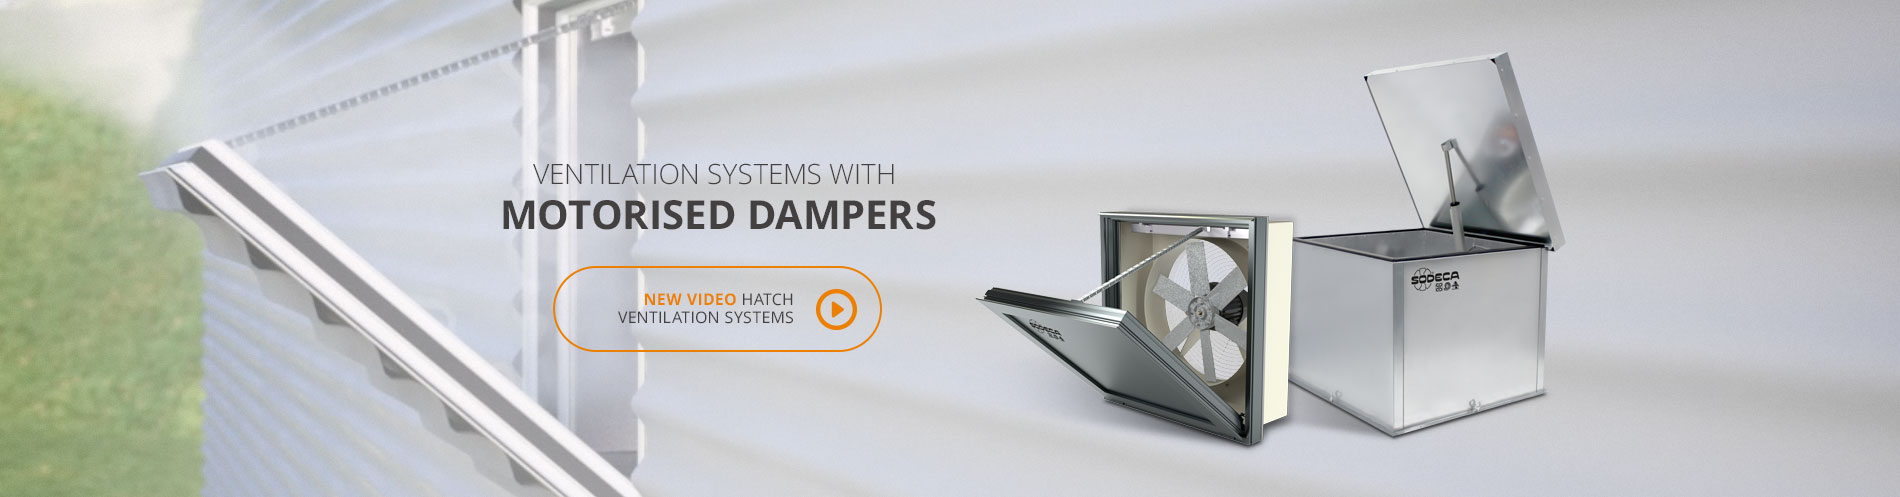 Ventilation systems with motorised dampers